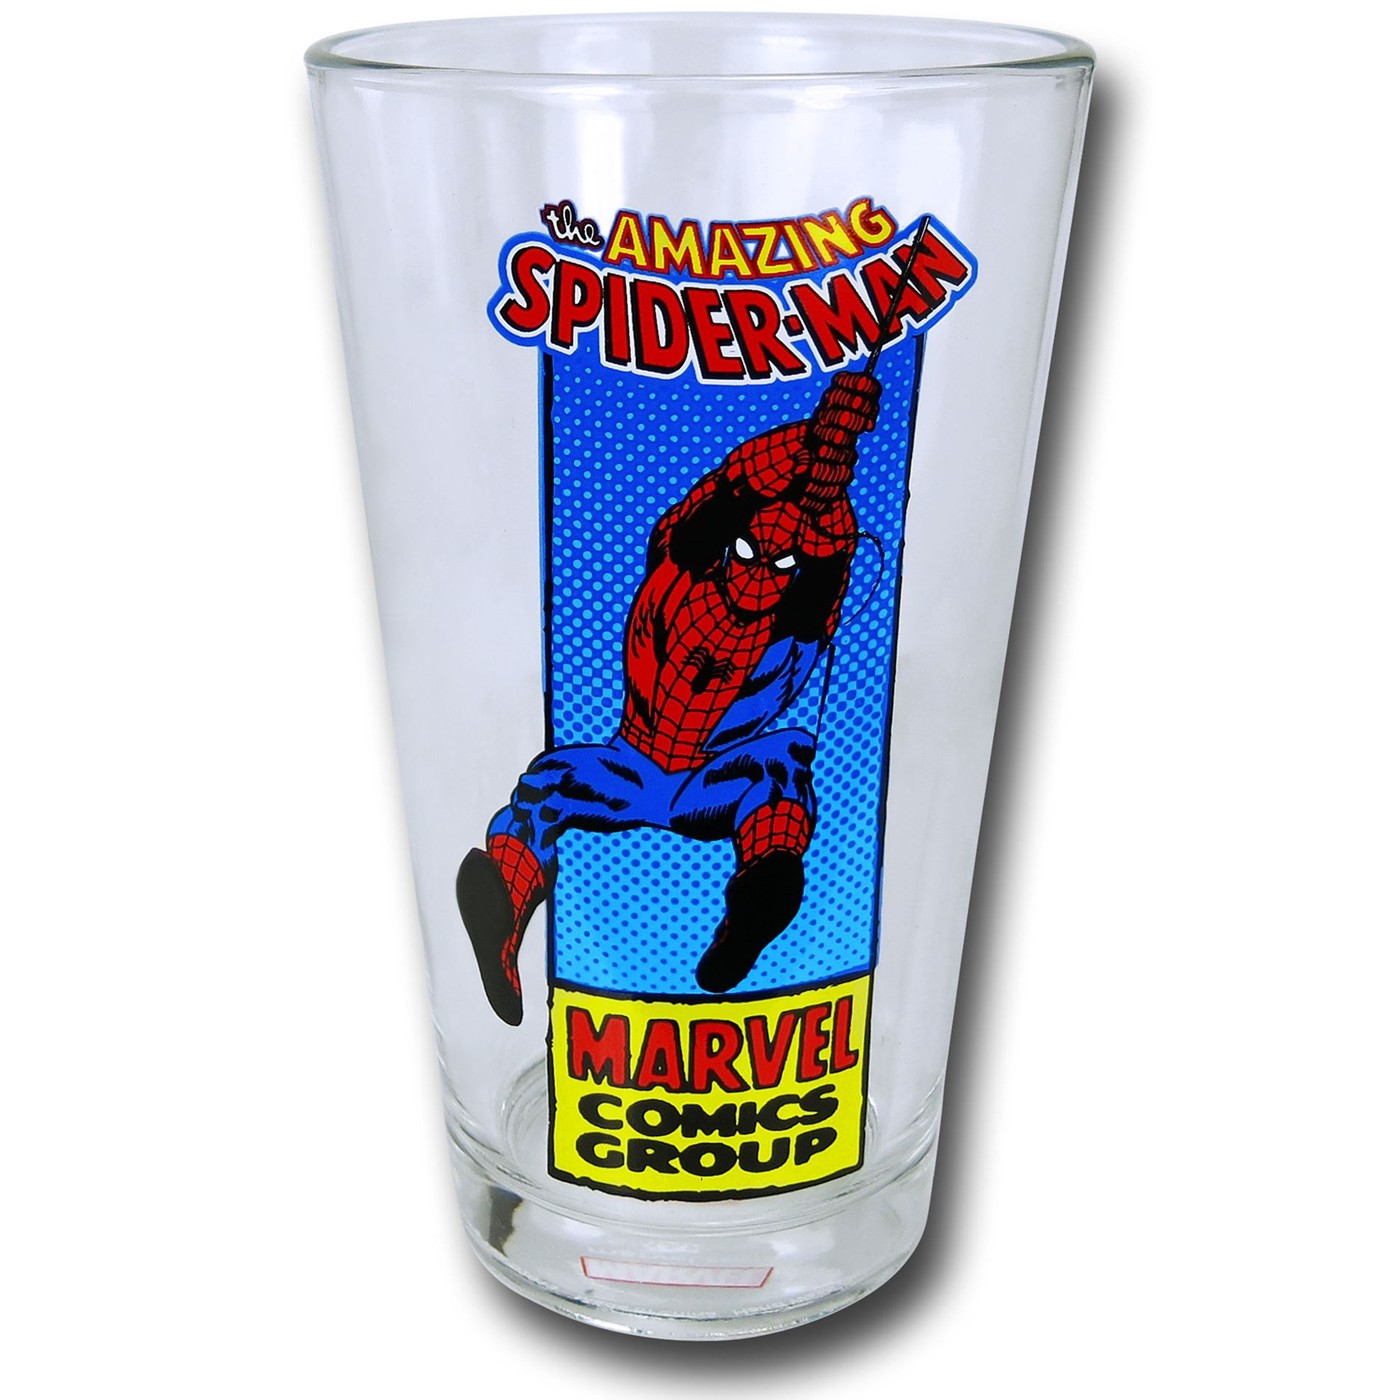 Spiderman & Wolverine Classic Pint Glass 2-Pack